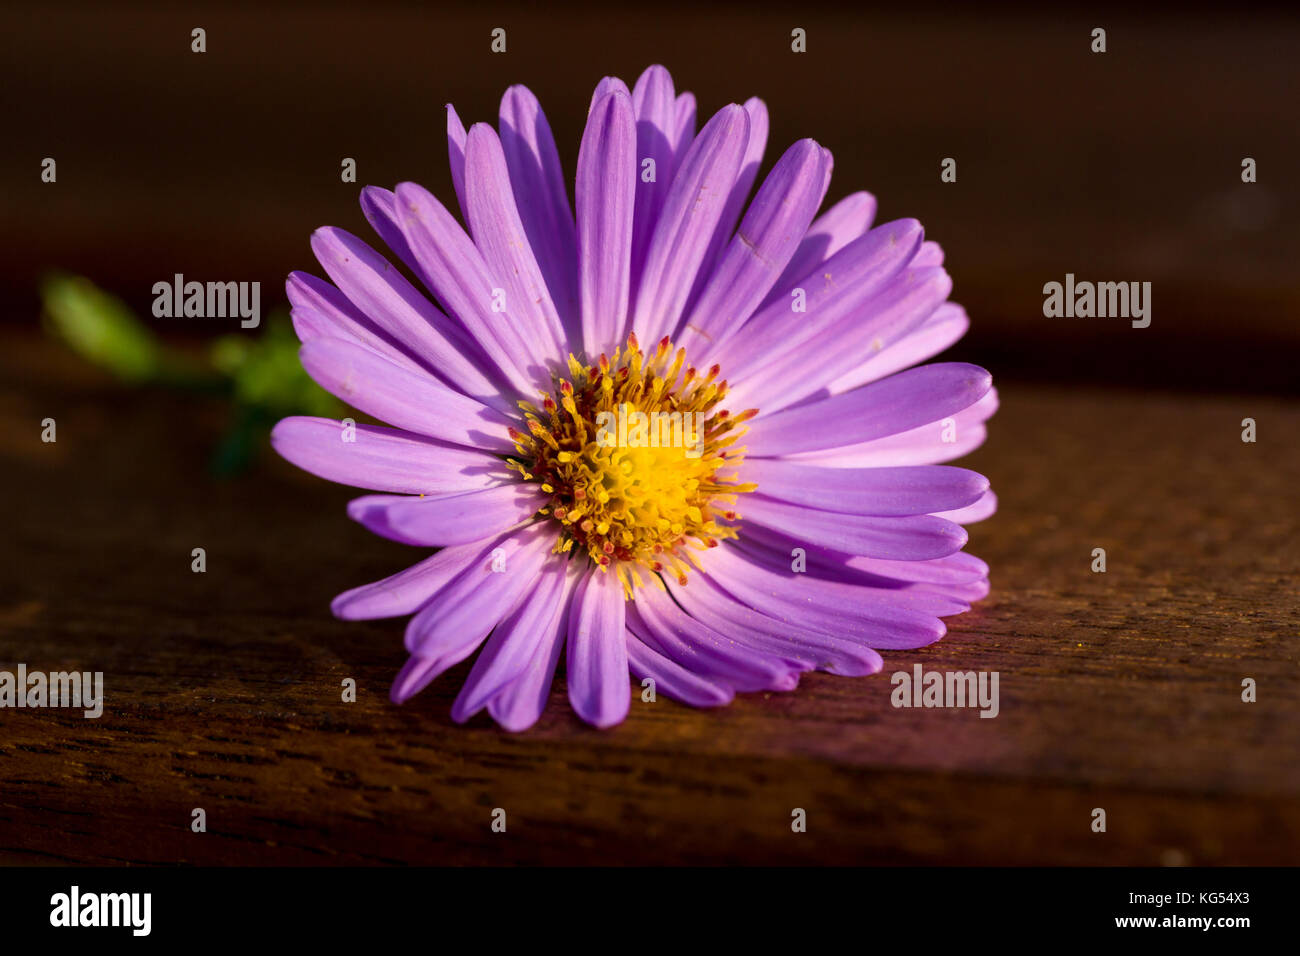 Closeup of single purple flower aster dumosus isolated with natural brown wood background. Stock Photo